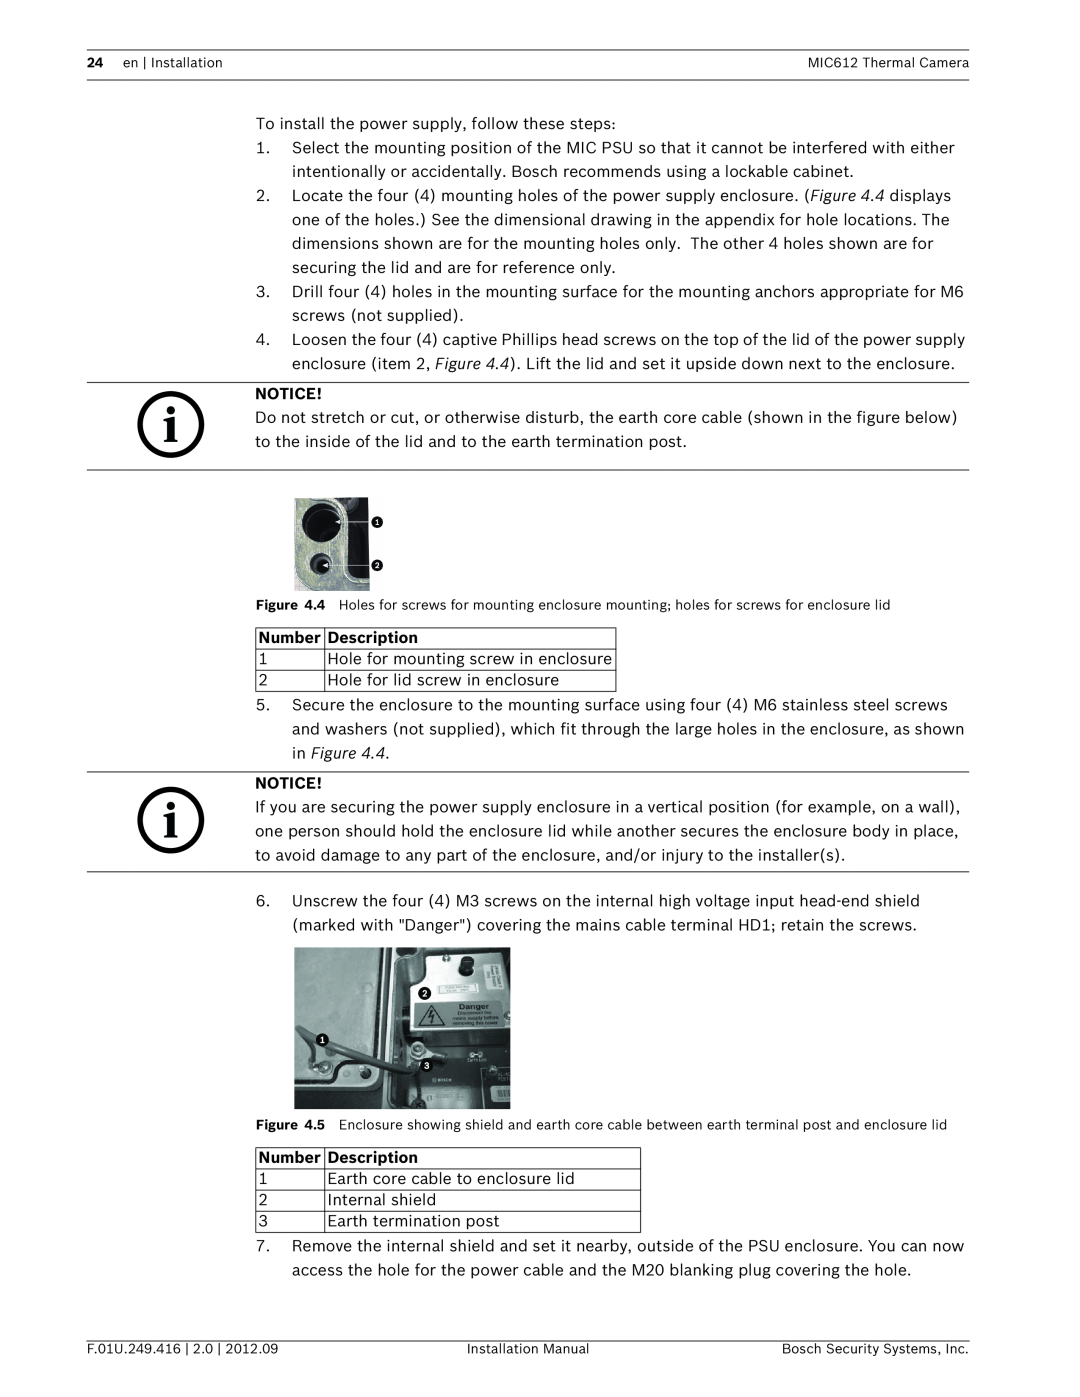 Bosch Appliances MIC612 installation manual To install the power supply, follow these steps 